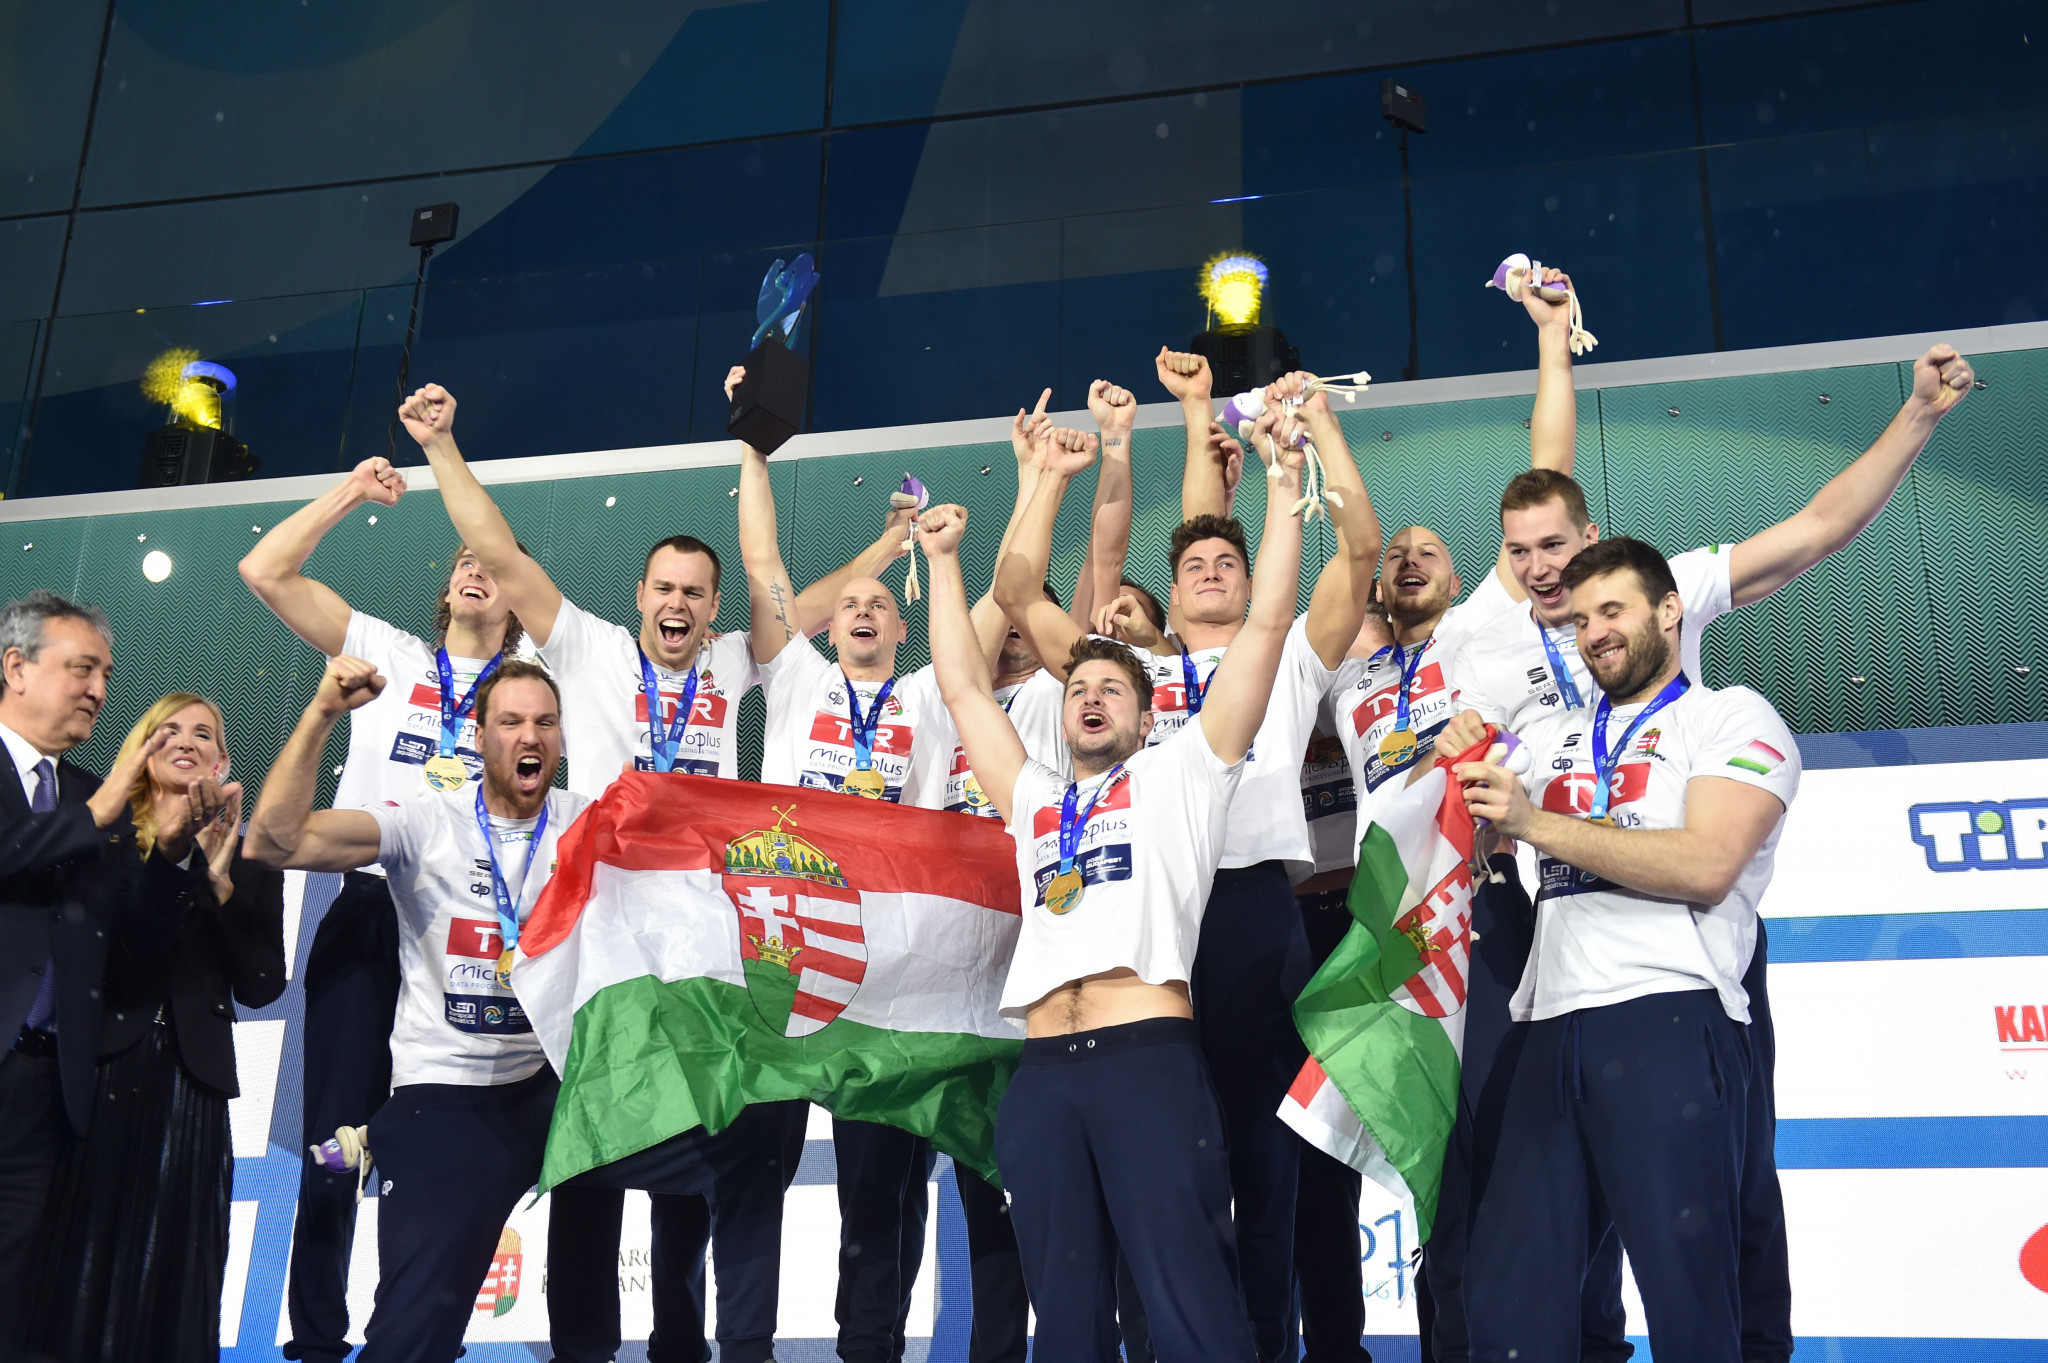 Hungary defeated Spain in a penalty shootout to win the Men's European Water Polo Championship ©Getty Images